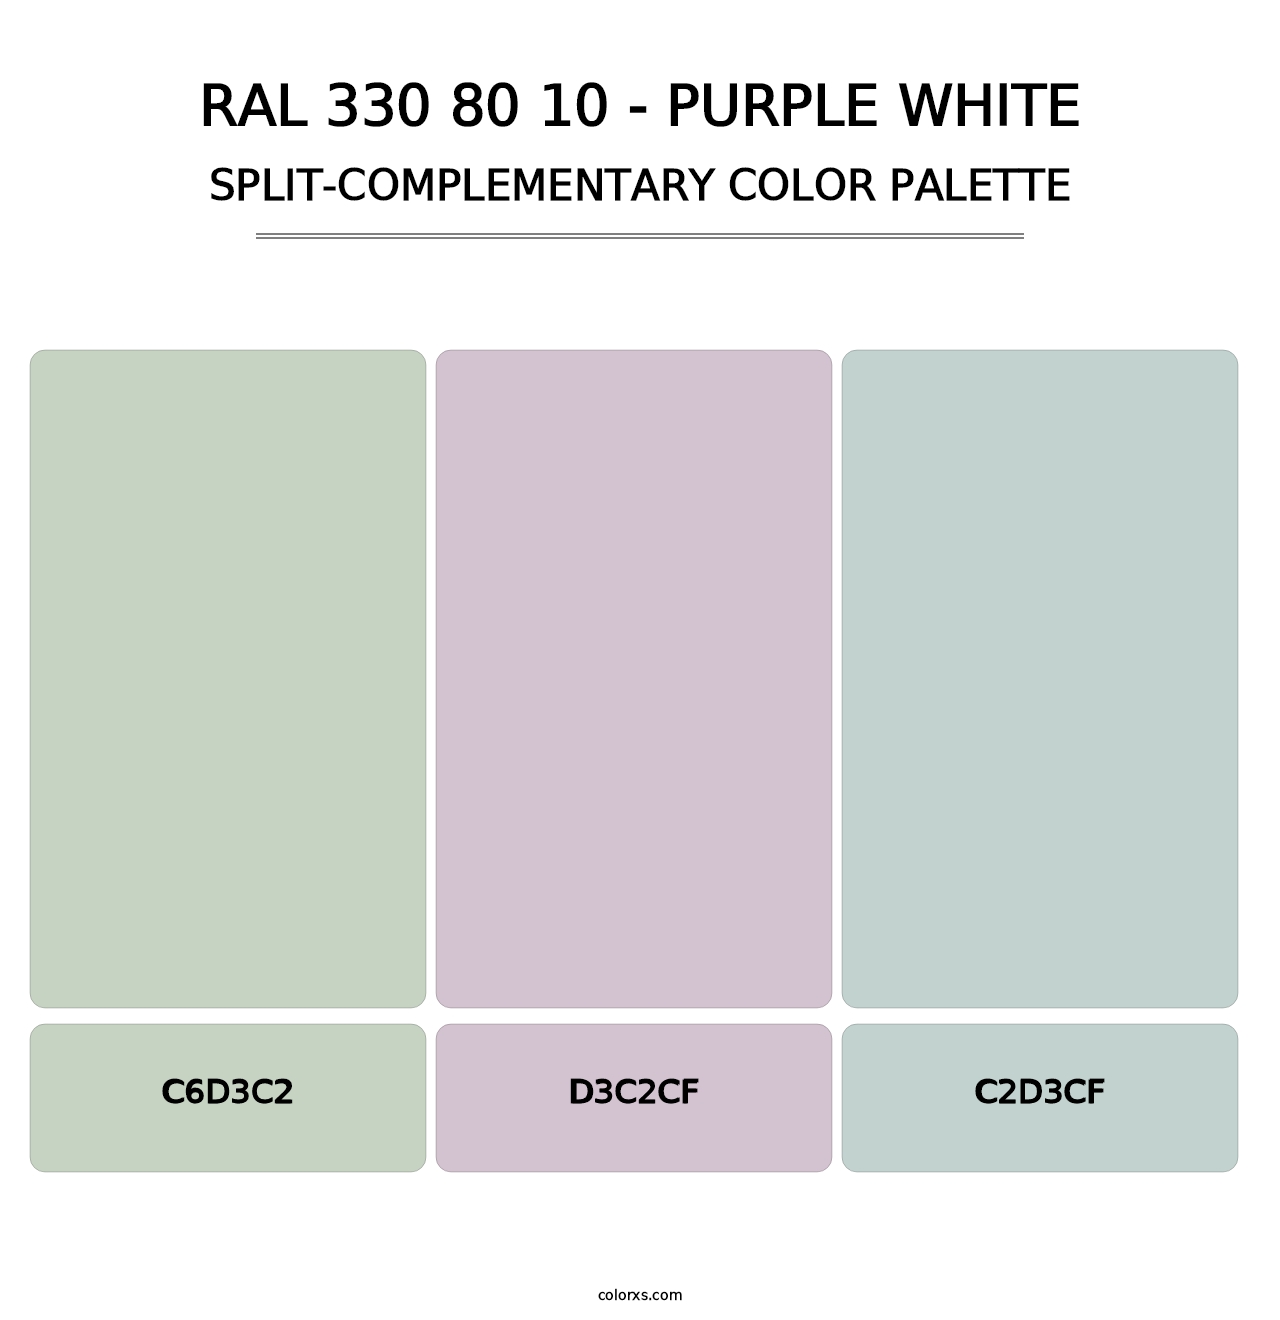 RAL 330 80 10 - Purple White - Split-Complementary Color Palette